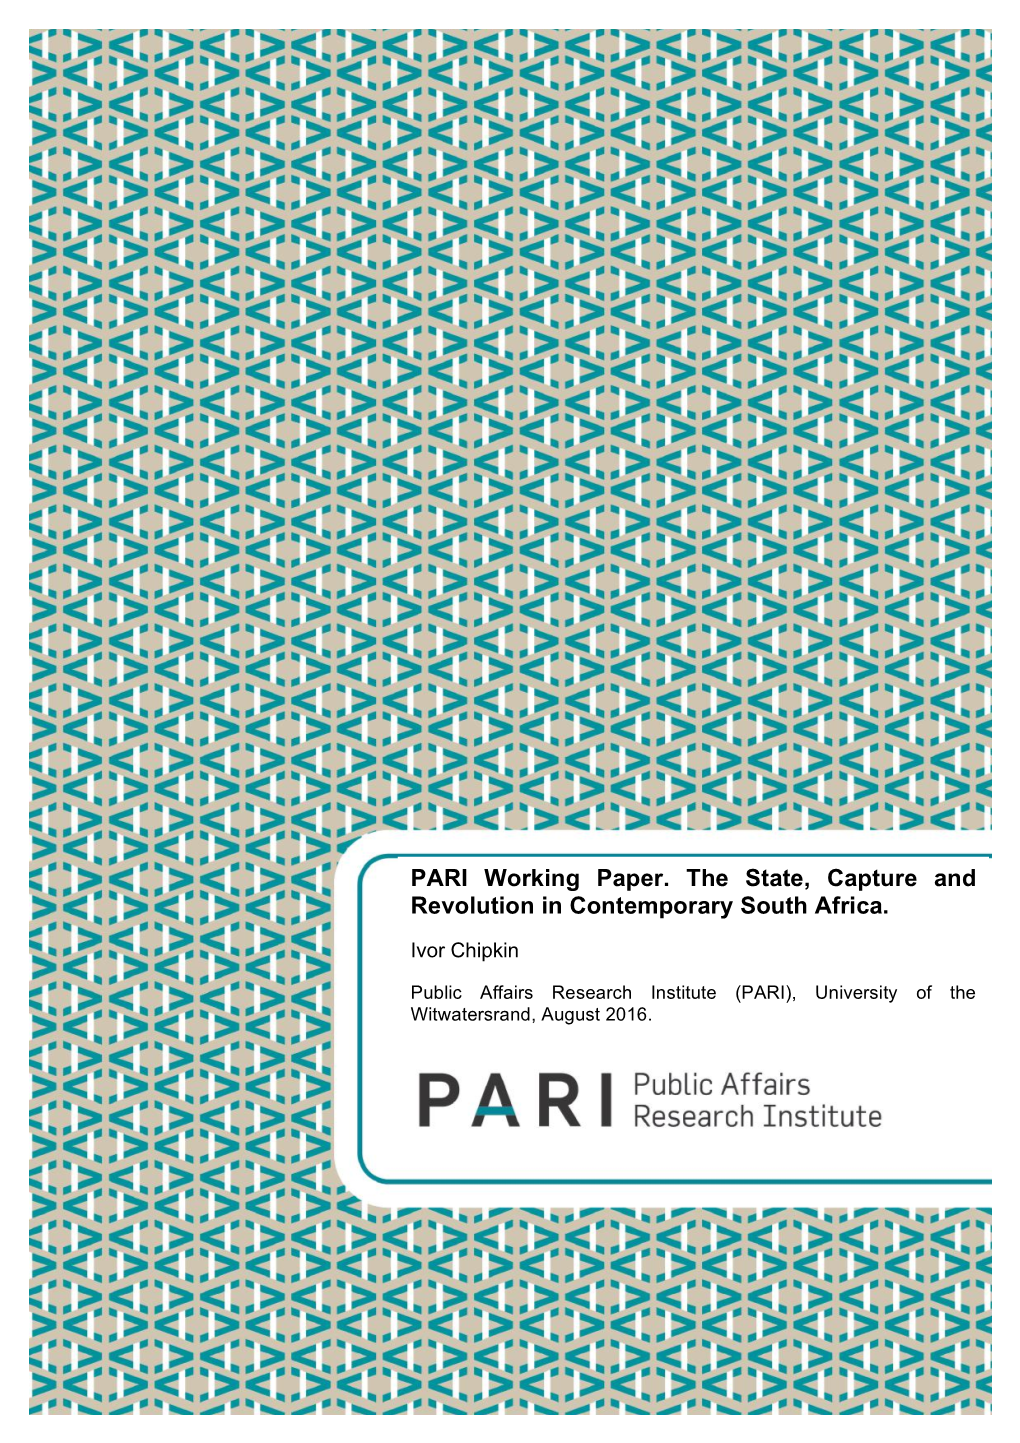 PARI Working Paper. the State, Capture and Revolution in Contemporary South Africa